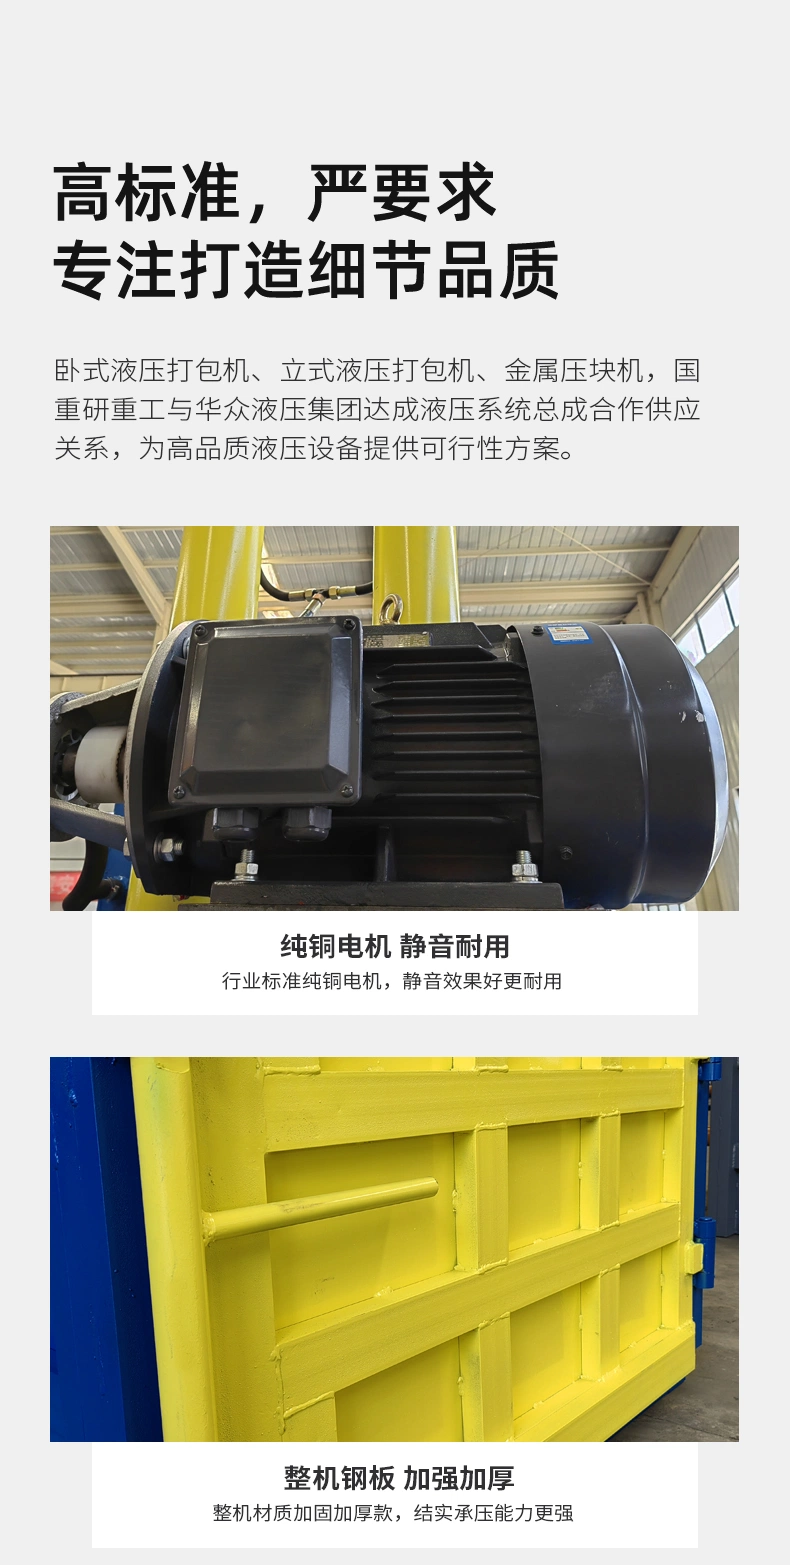 Hot Selling Factories Bale Machine Equipment for Recycling Materials Produced by Hydraulic Bale Press